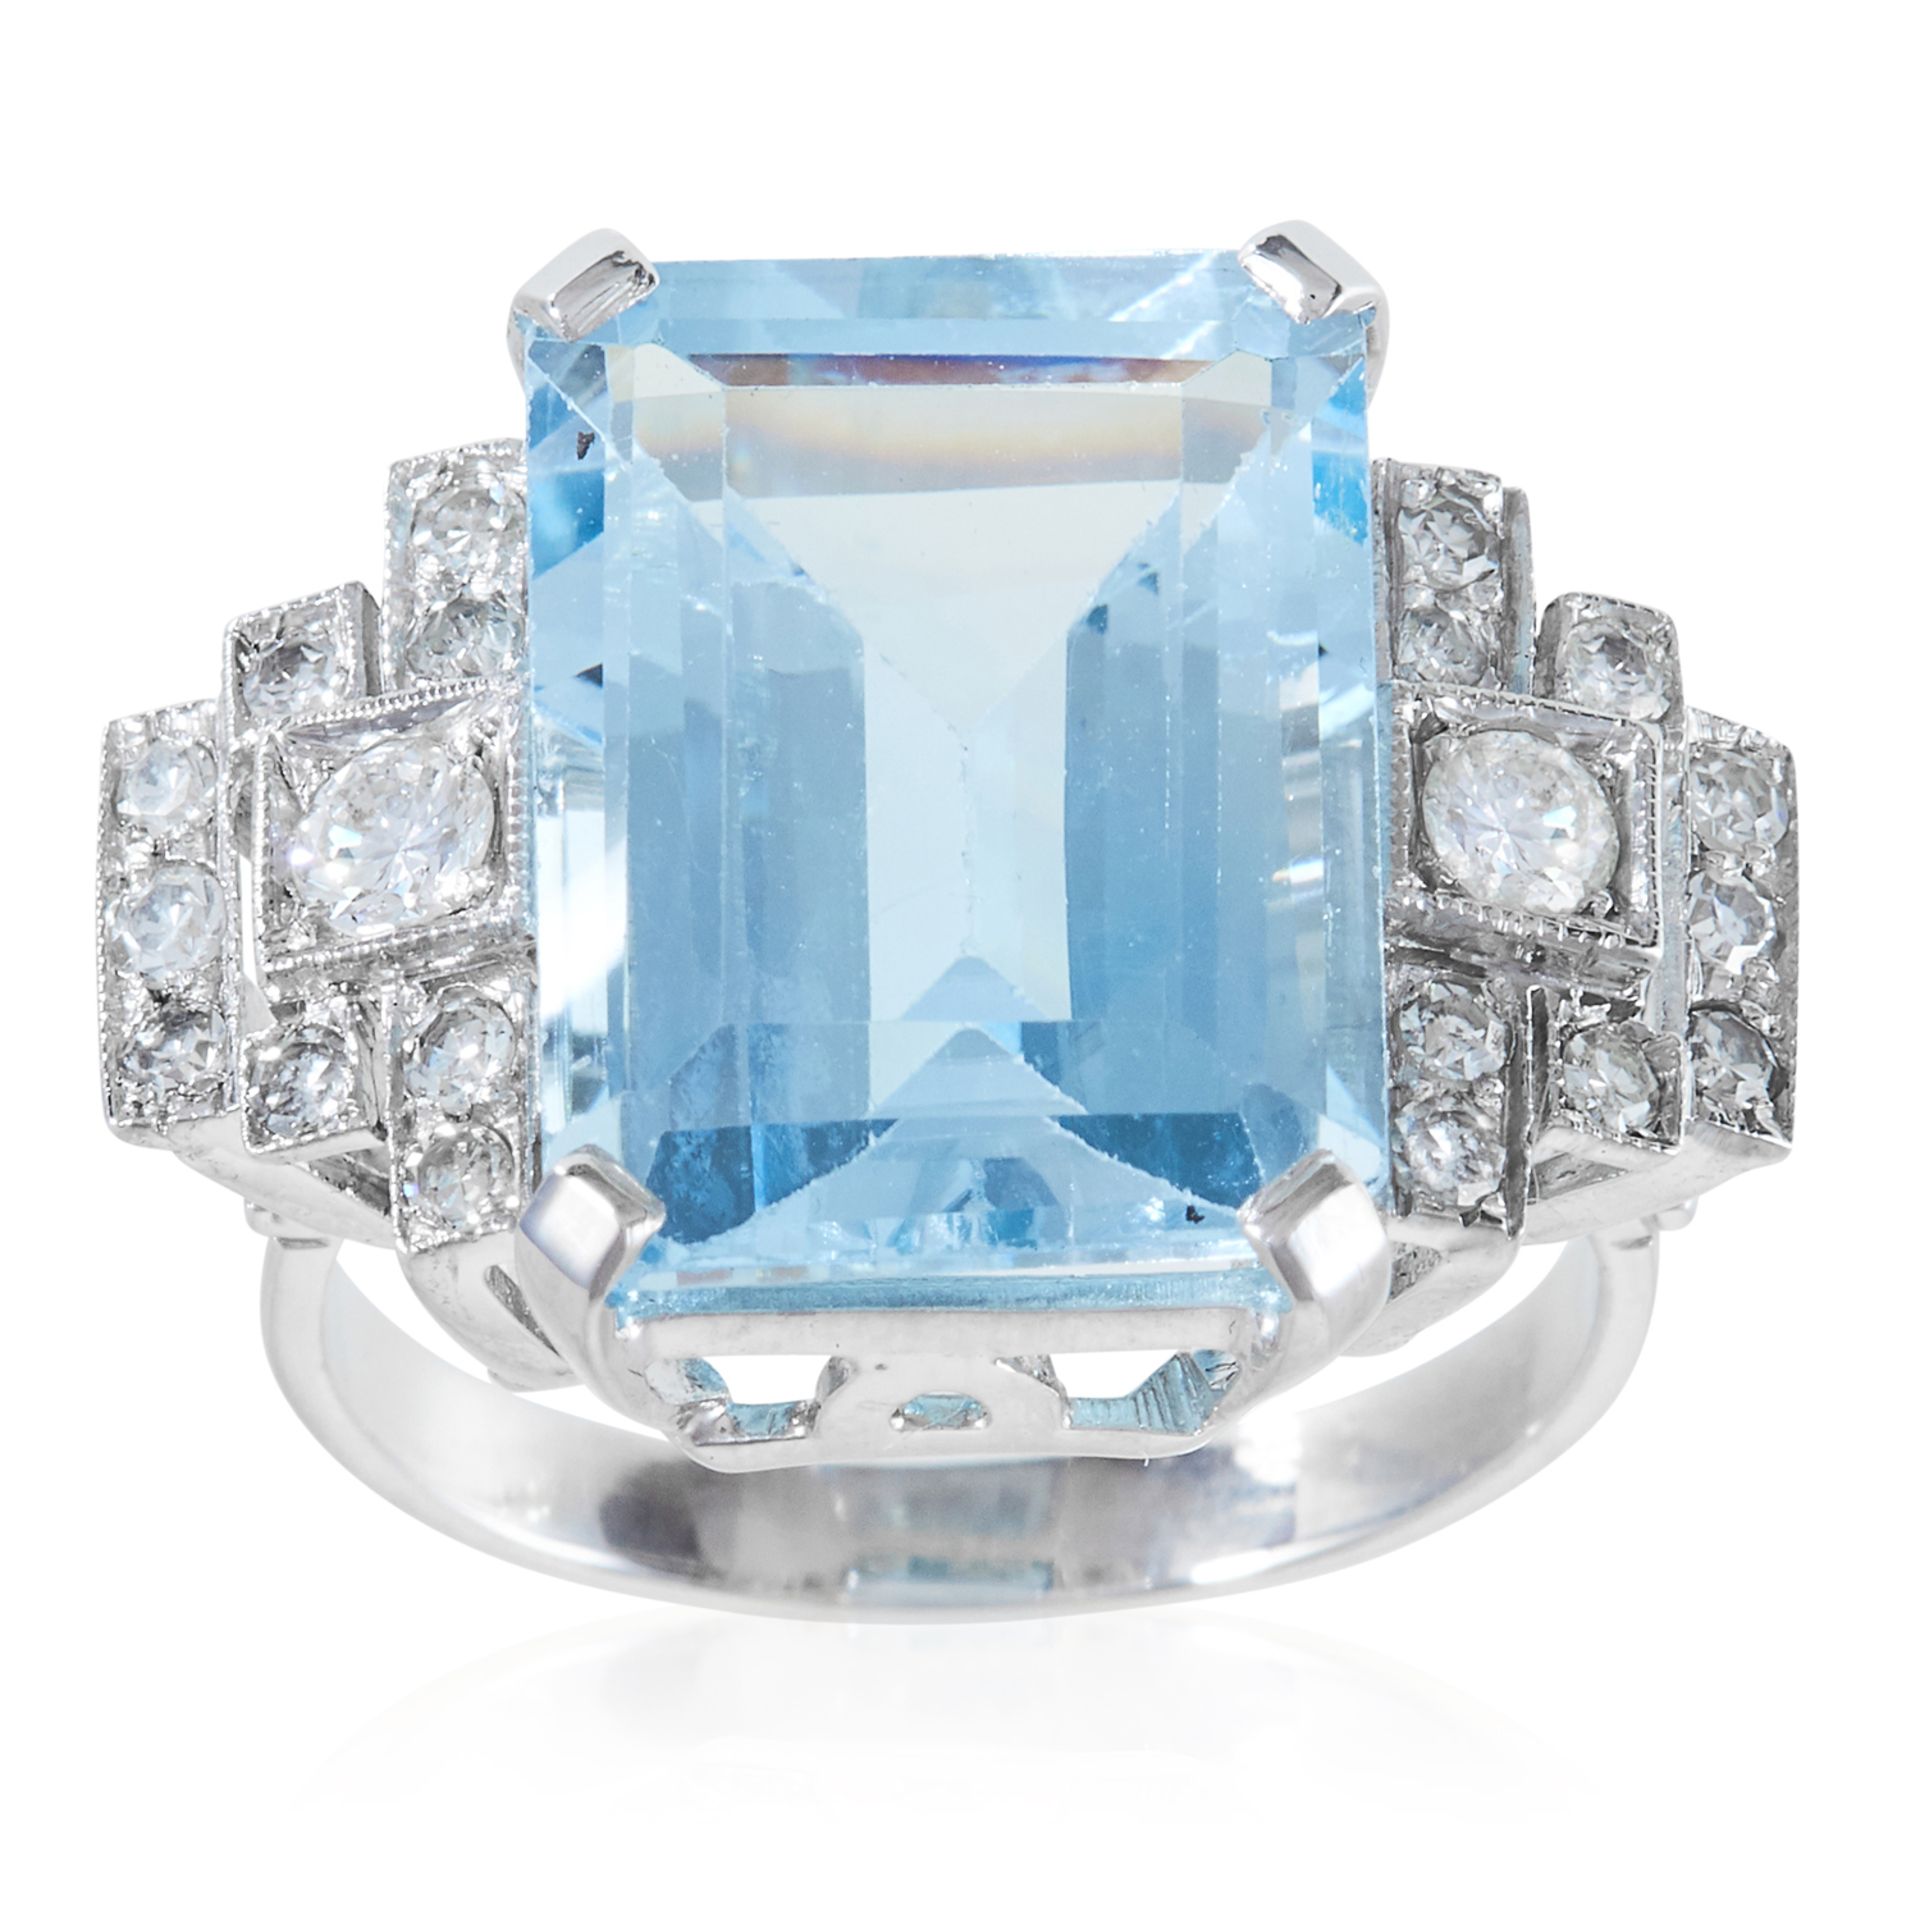 AN ART DECO AQUAMARINE AND DIAMOND DRESS RING in platinum or white gold, the emerald cut